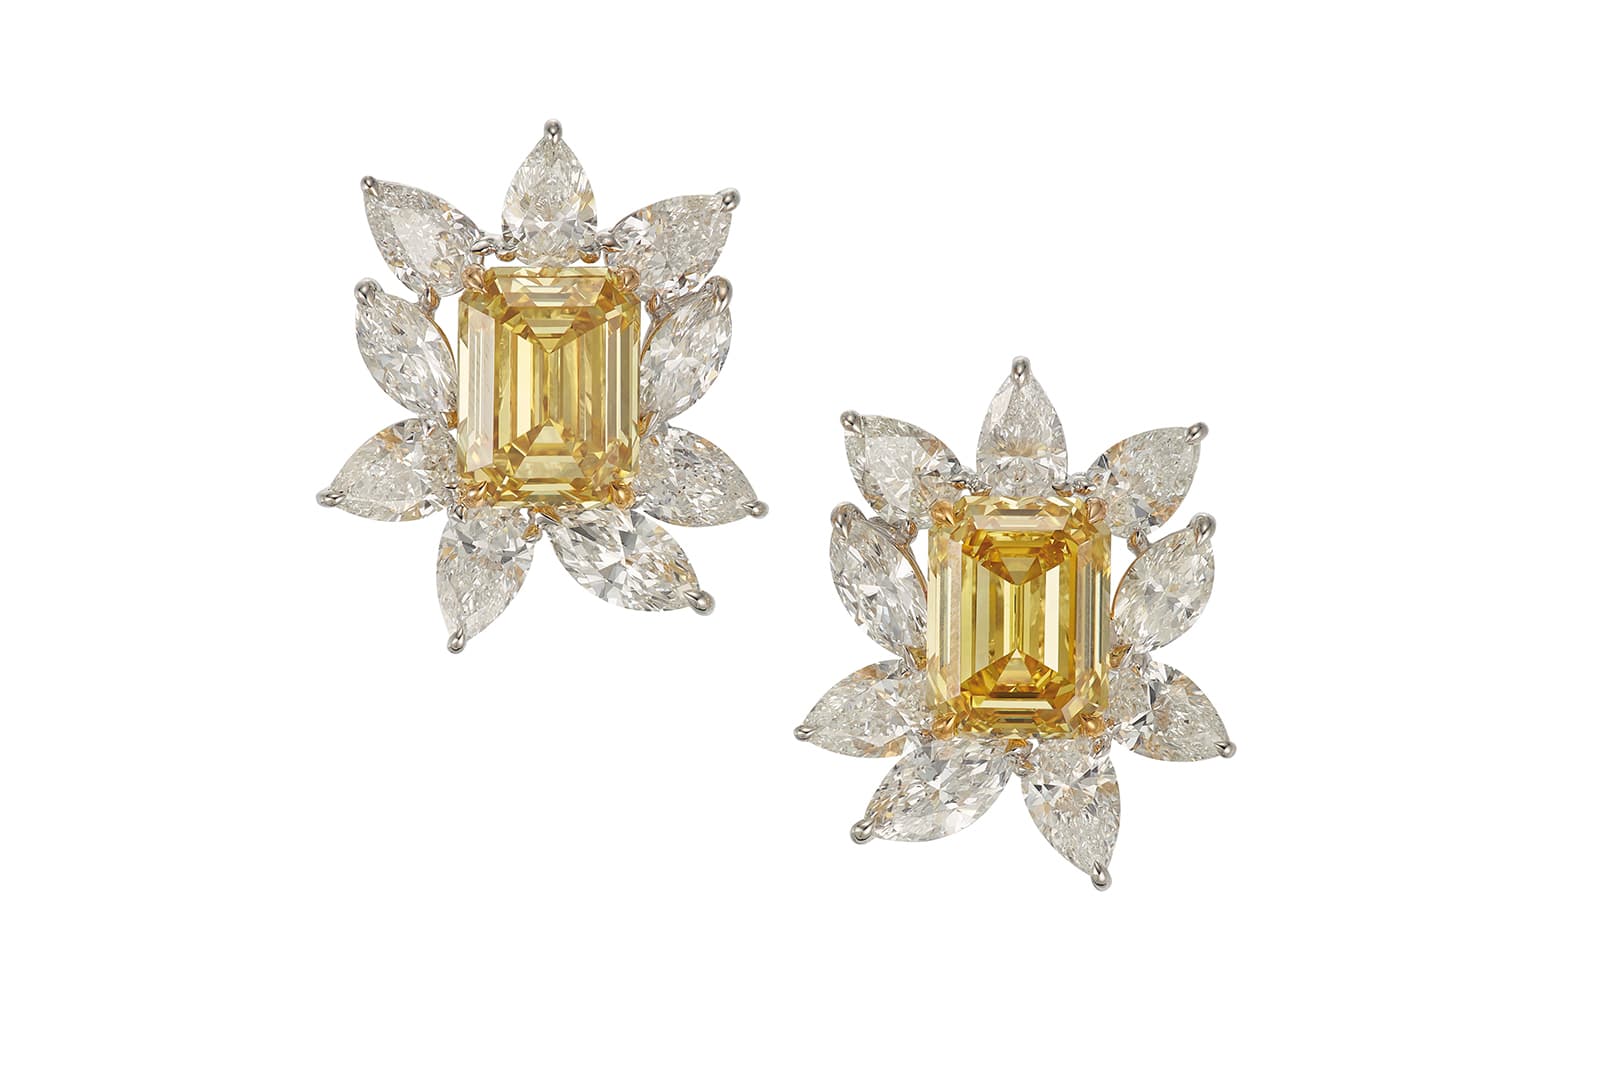 A pair of fancy deep yellow diamond earrings of 7.55 carats and 7.51 carats